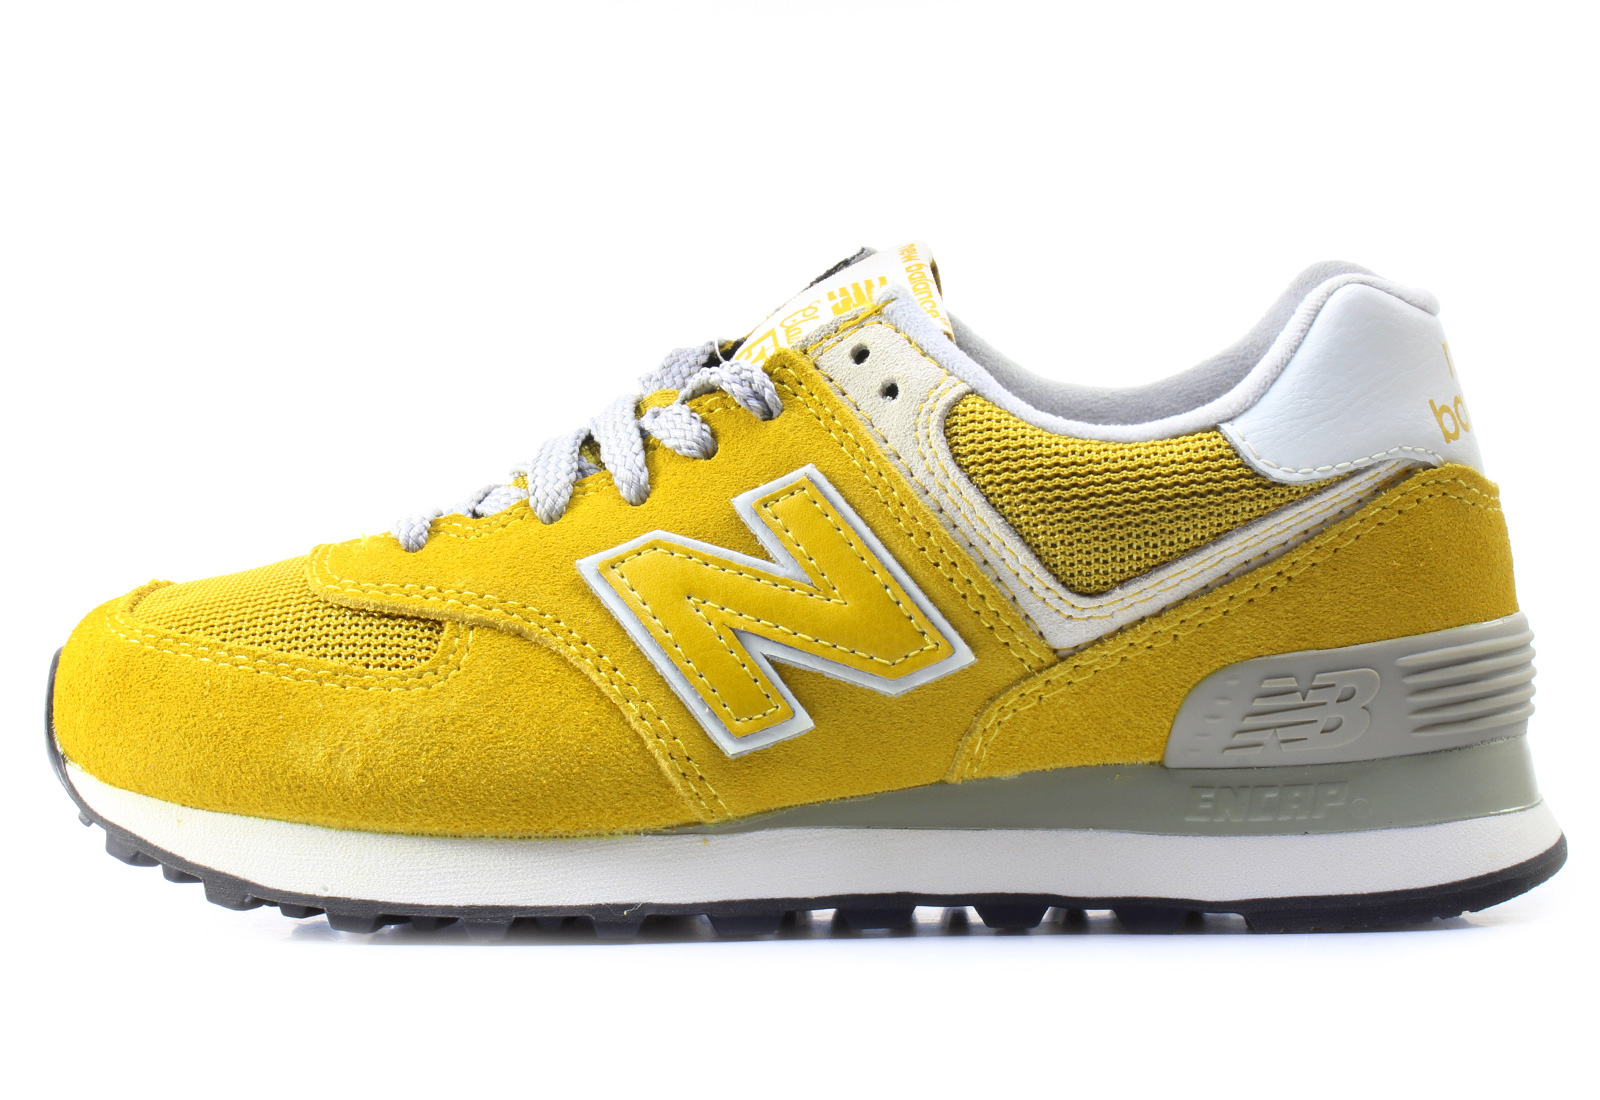 New Balance Shoes - Ml574 - ML574VMU - Online shop for sneakers, shoes ...